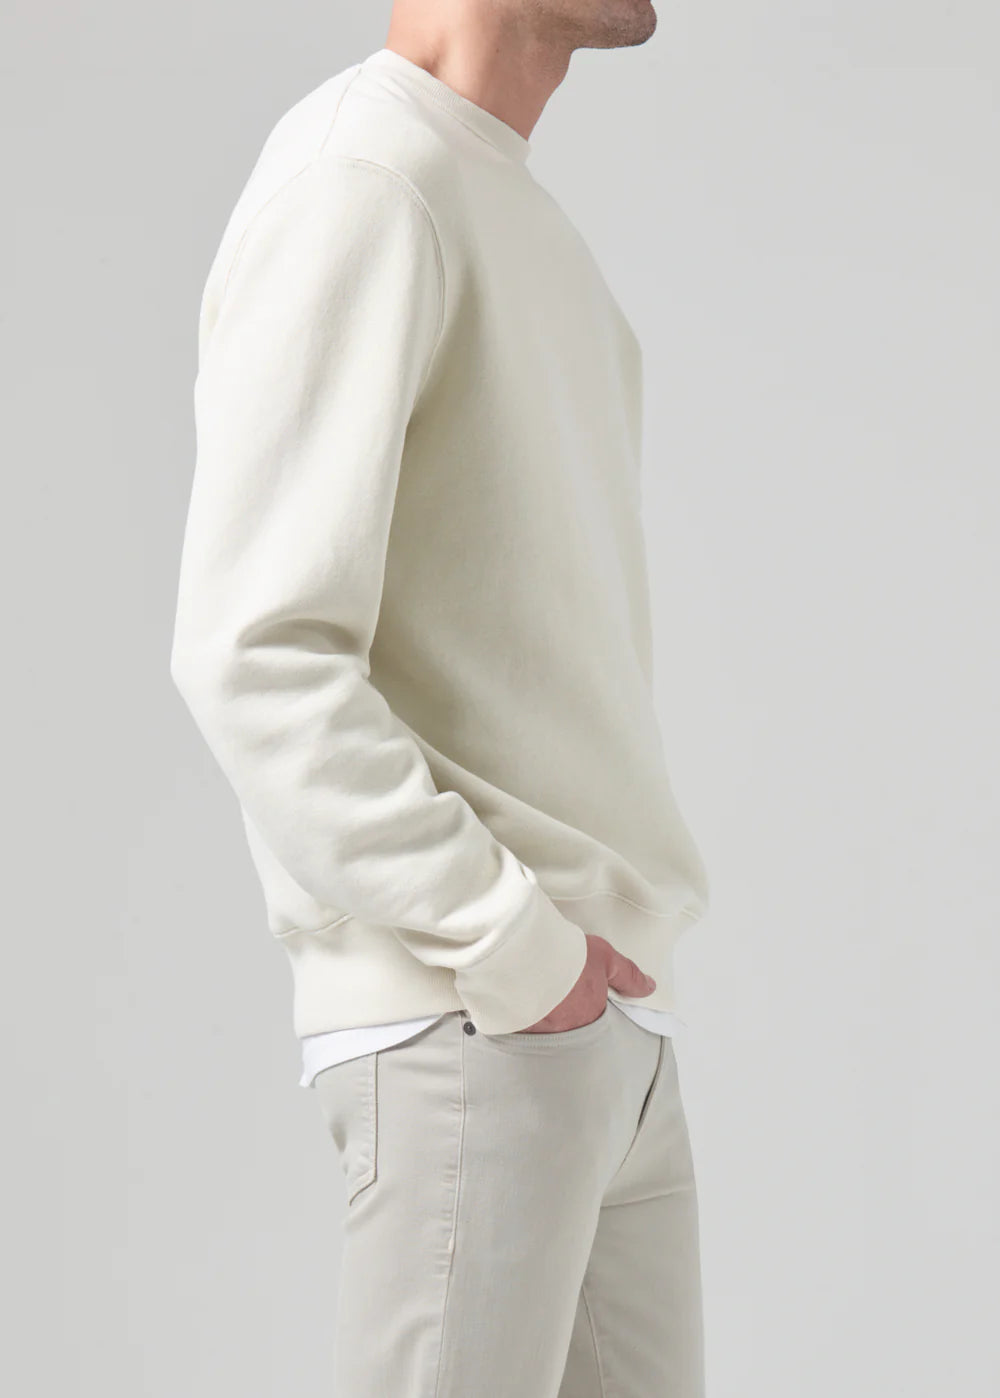 Side view of a model wearing the Vintage crewneck sweater from Citizens of Humanity in off-white cream color. Showcases the regular, comfy fit.